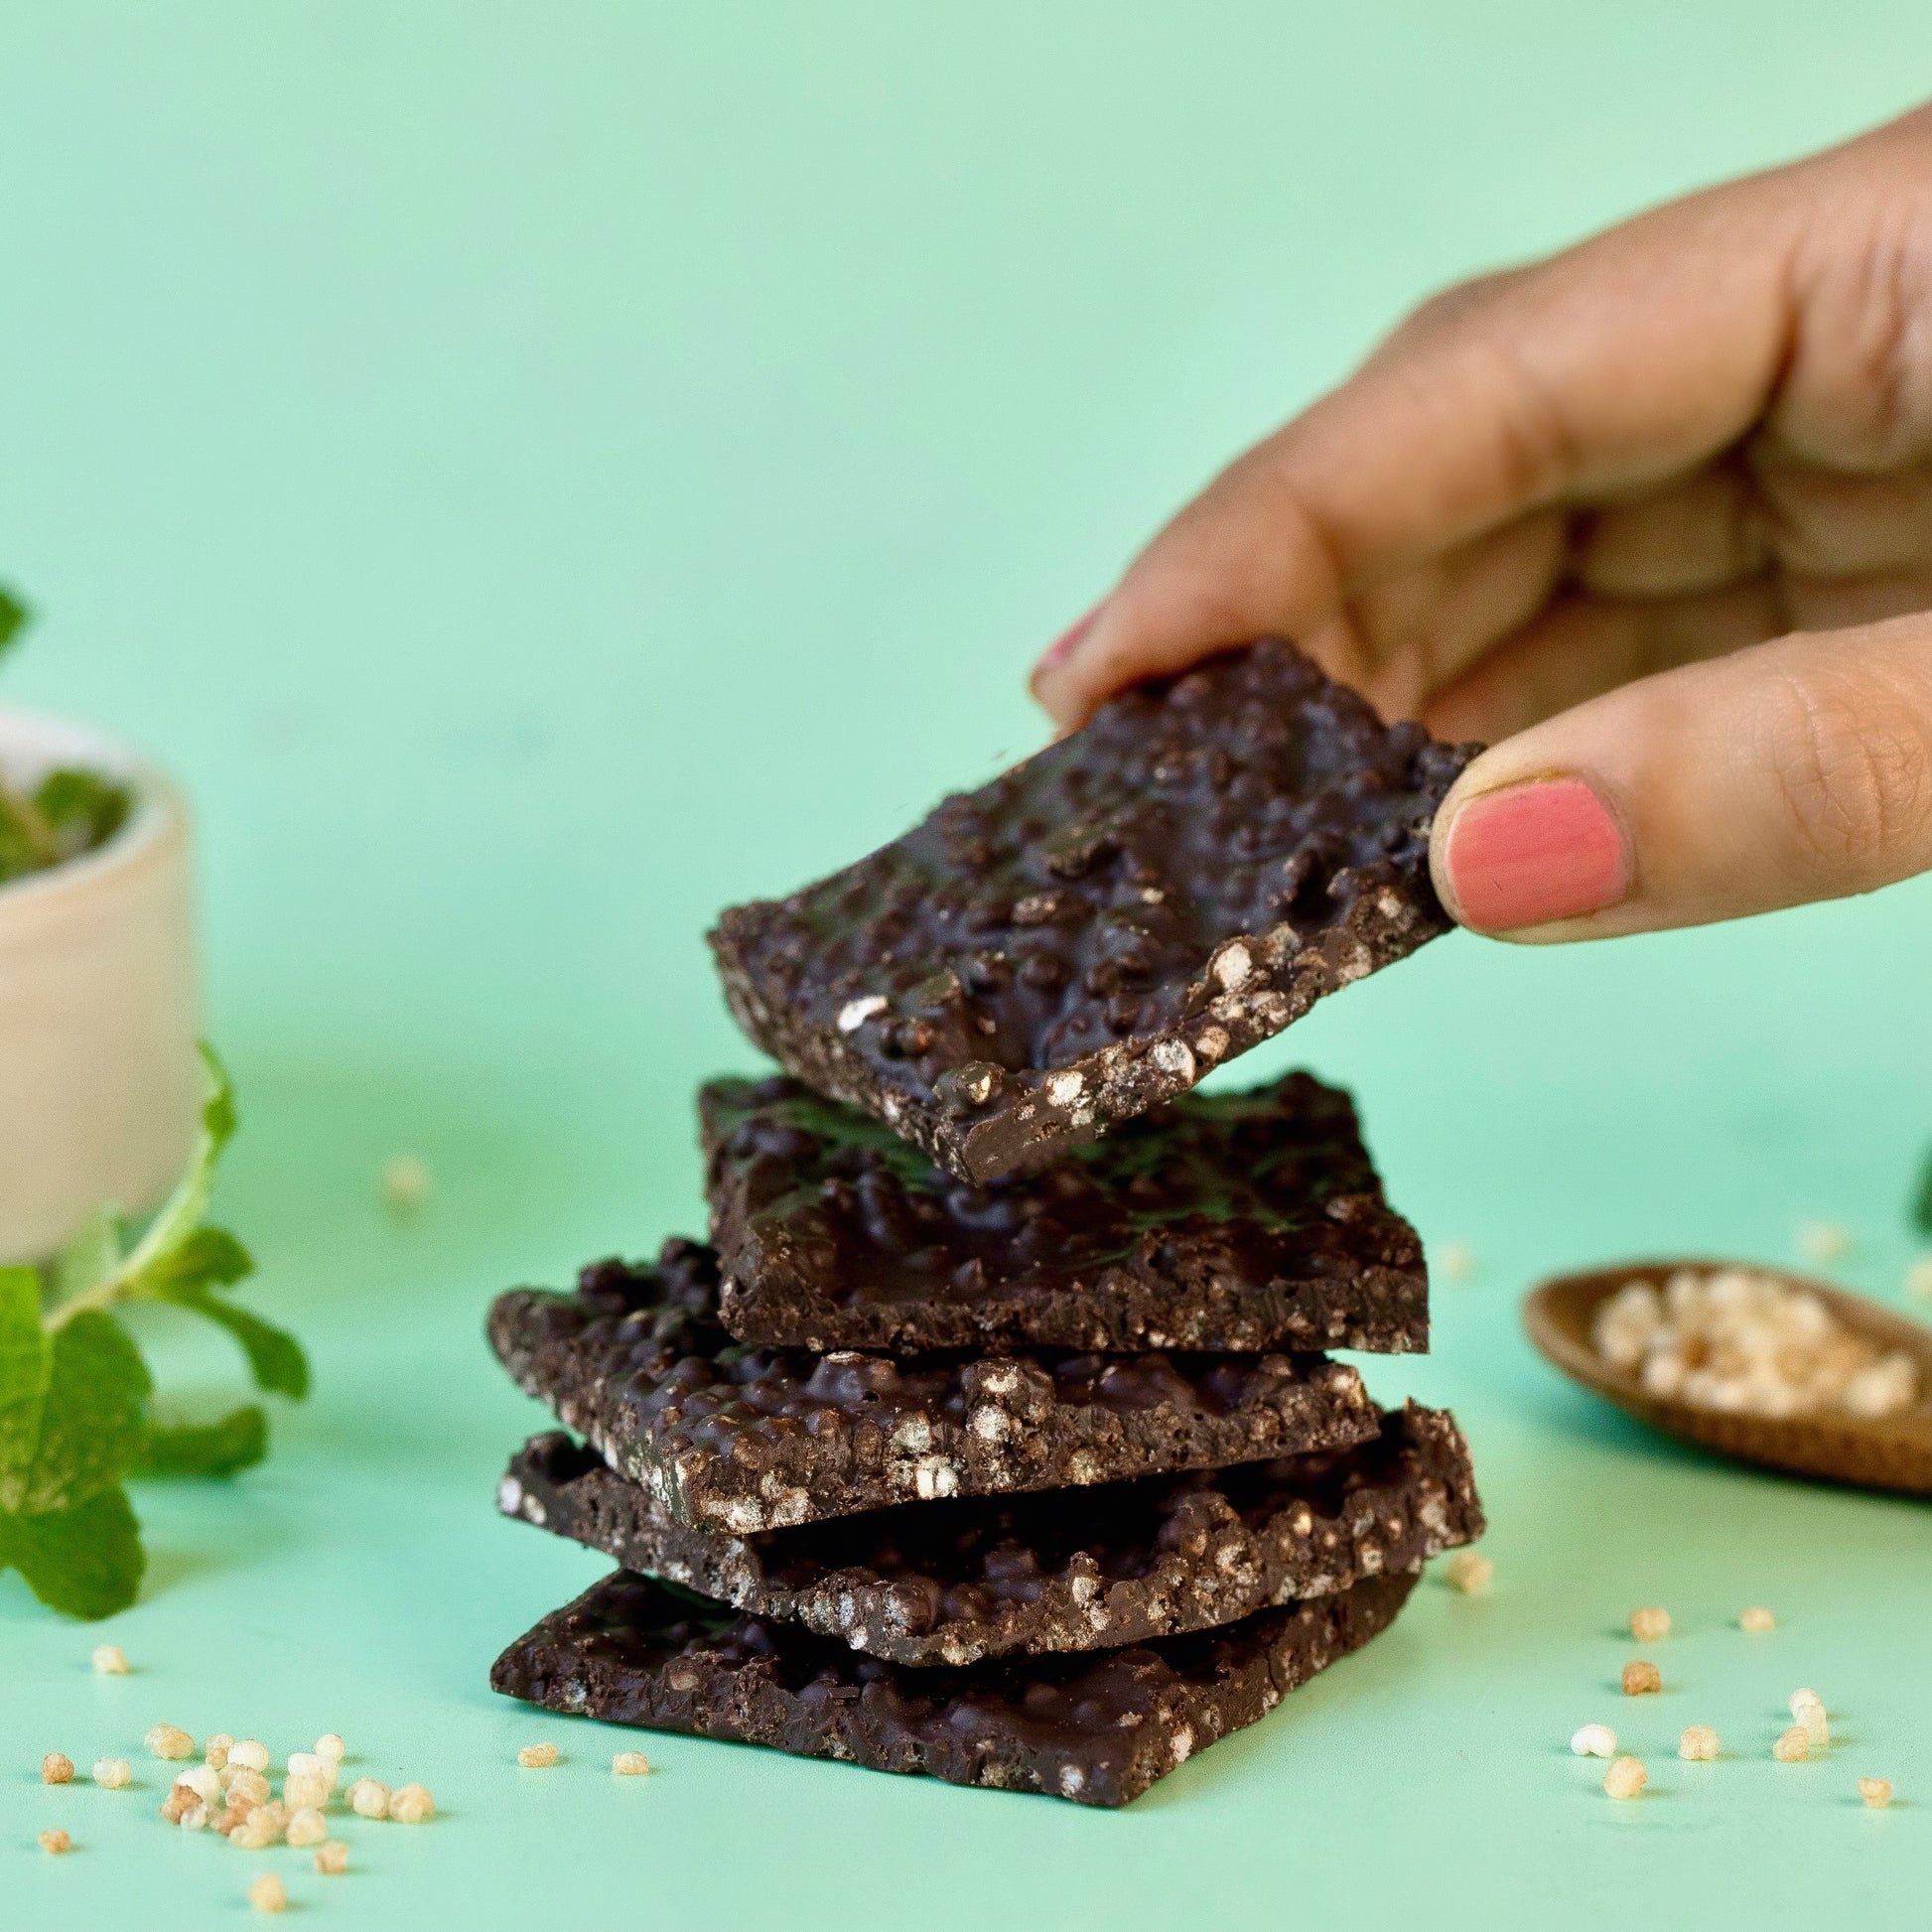 Mildly Dark Chocolate Mint with Quinoa Crisps (Pack of 3), 300g - Mojo Snacks